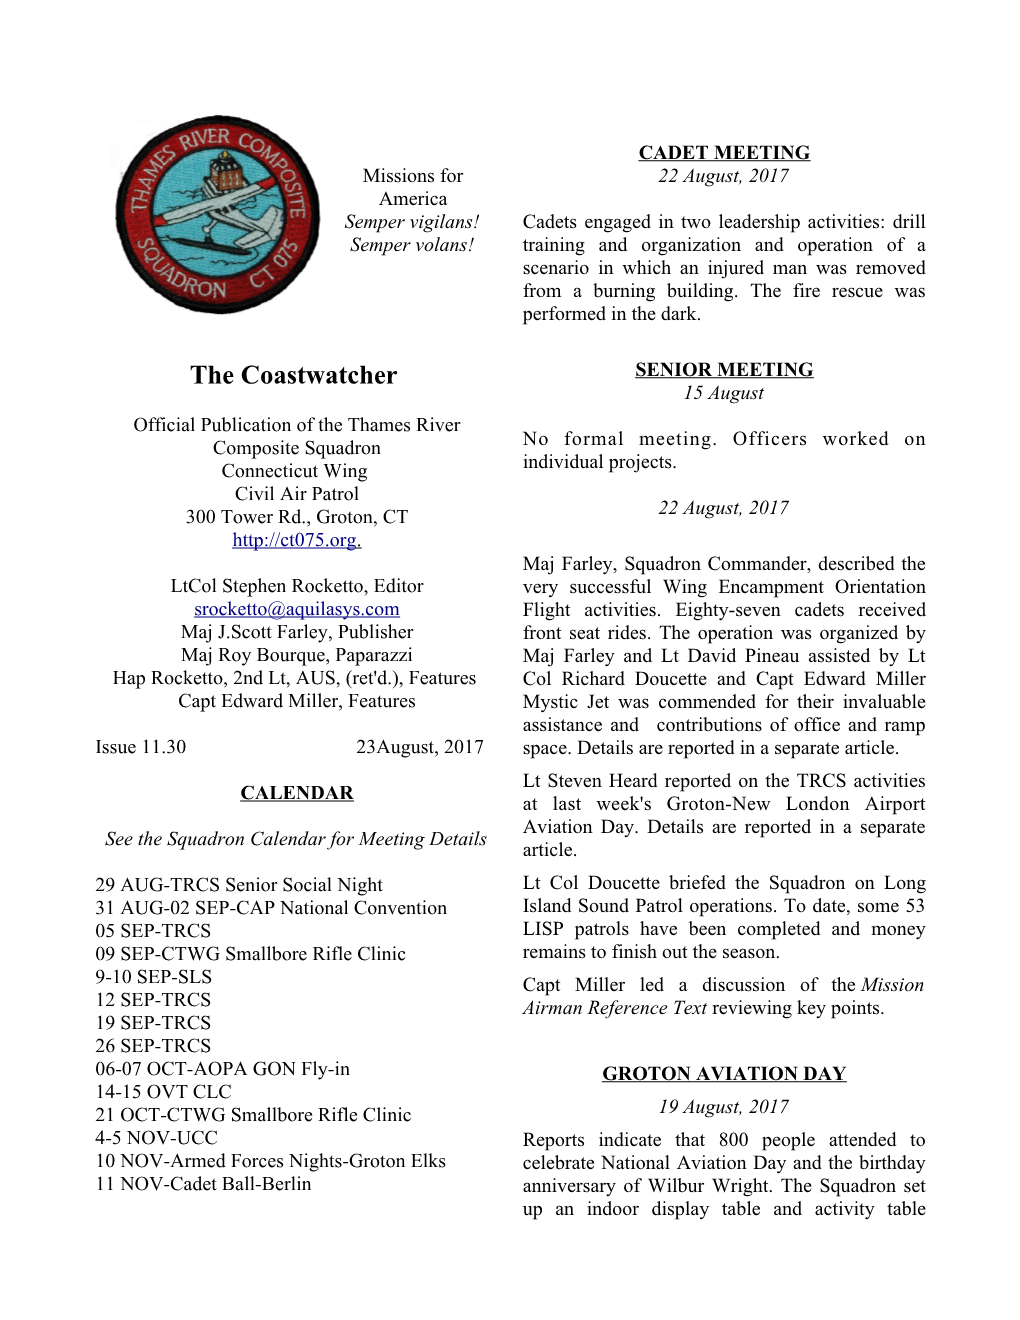 The Coastwatcher SENIOR MEETING 15 August Official Publication of the Thames River Composite Squadron No Formal Meeting